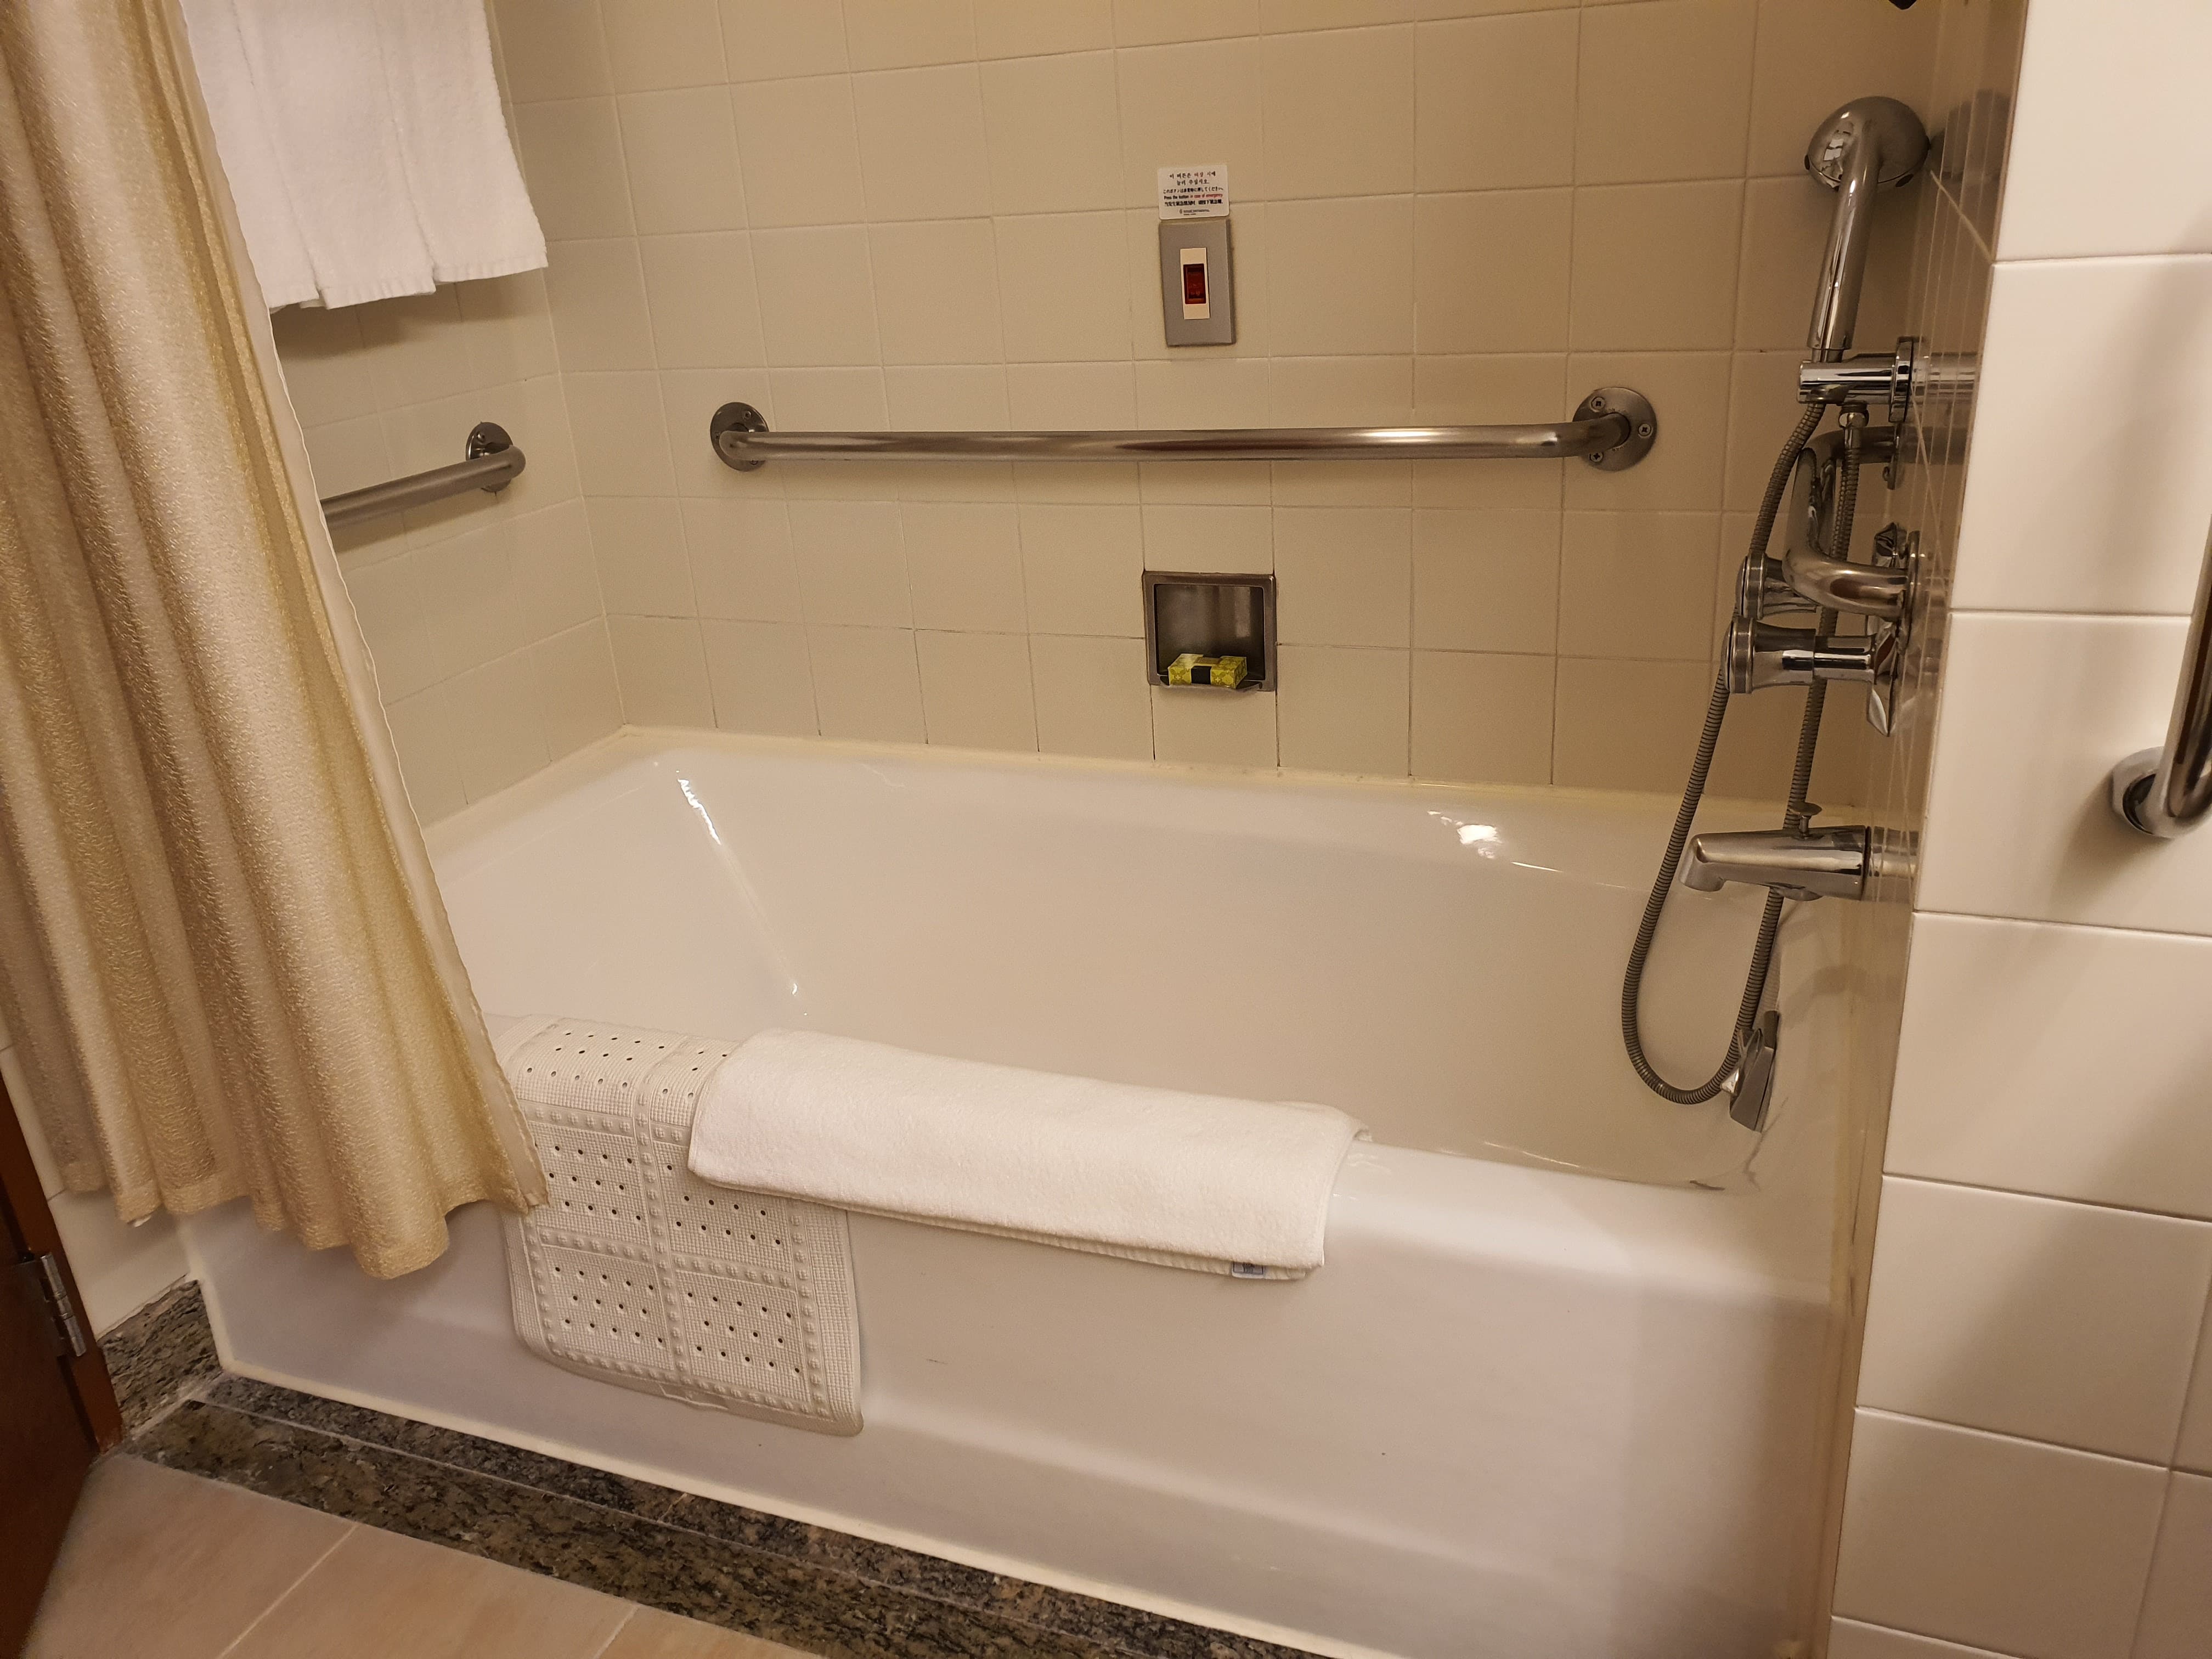 Bathroom in the guestroom0 : Bath tub equipped with grab bars